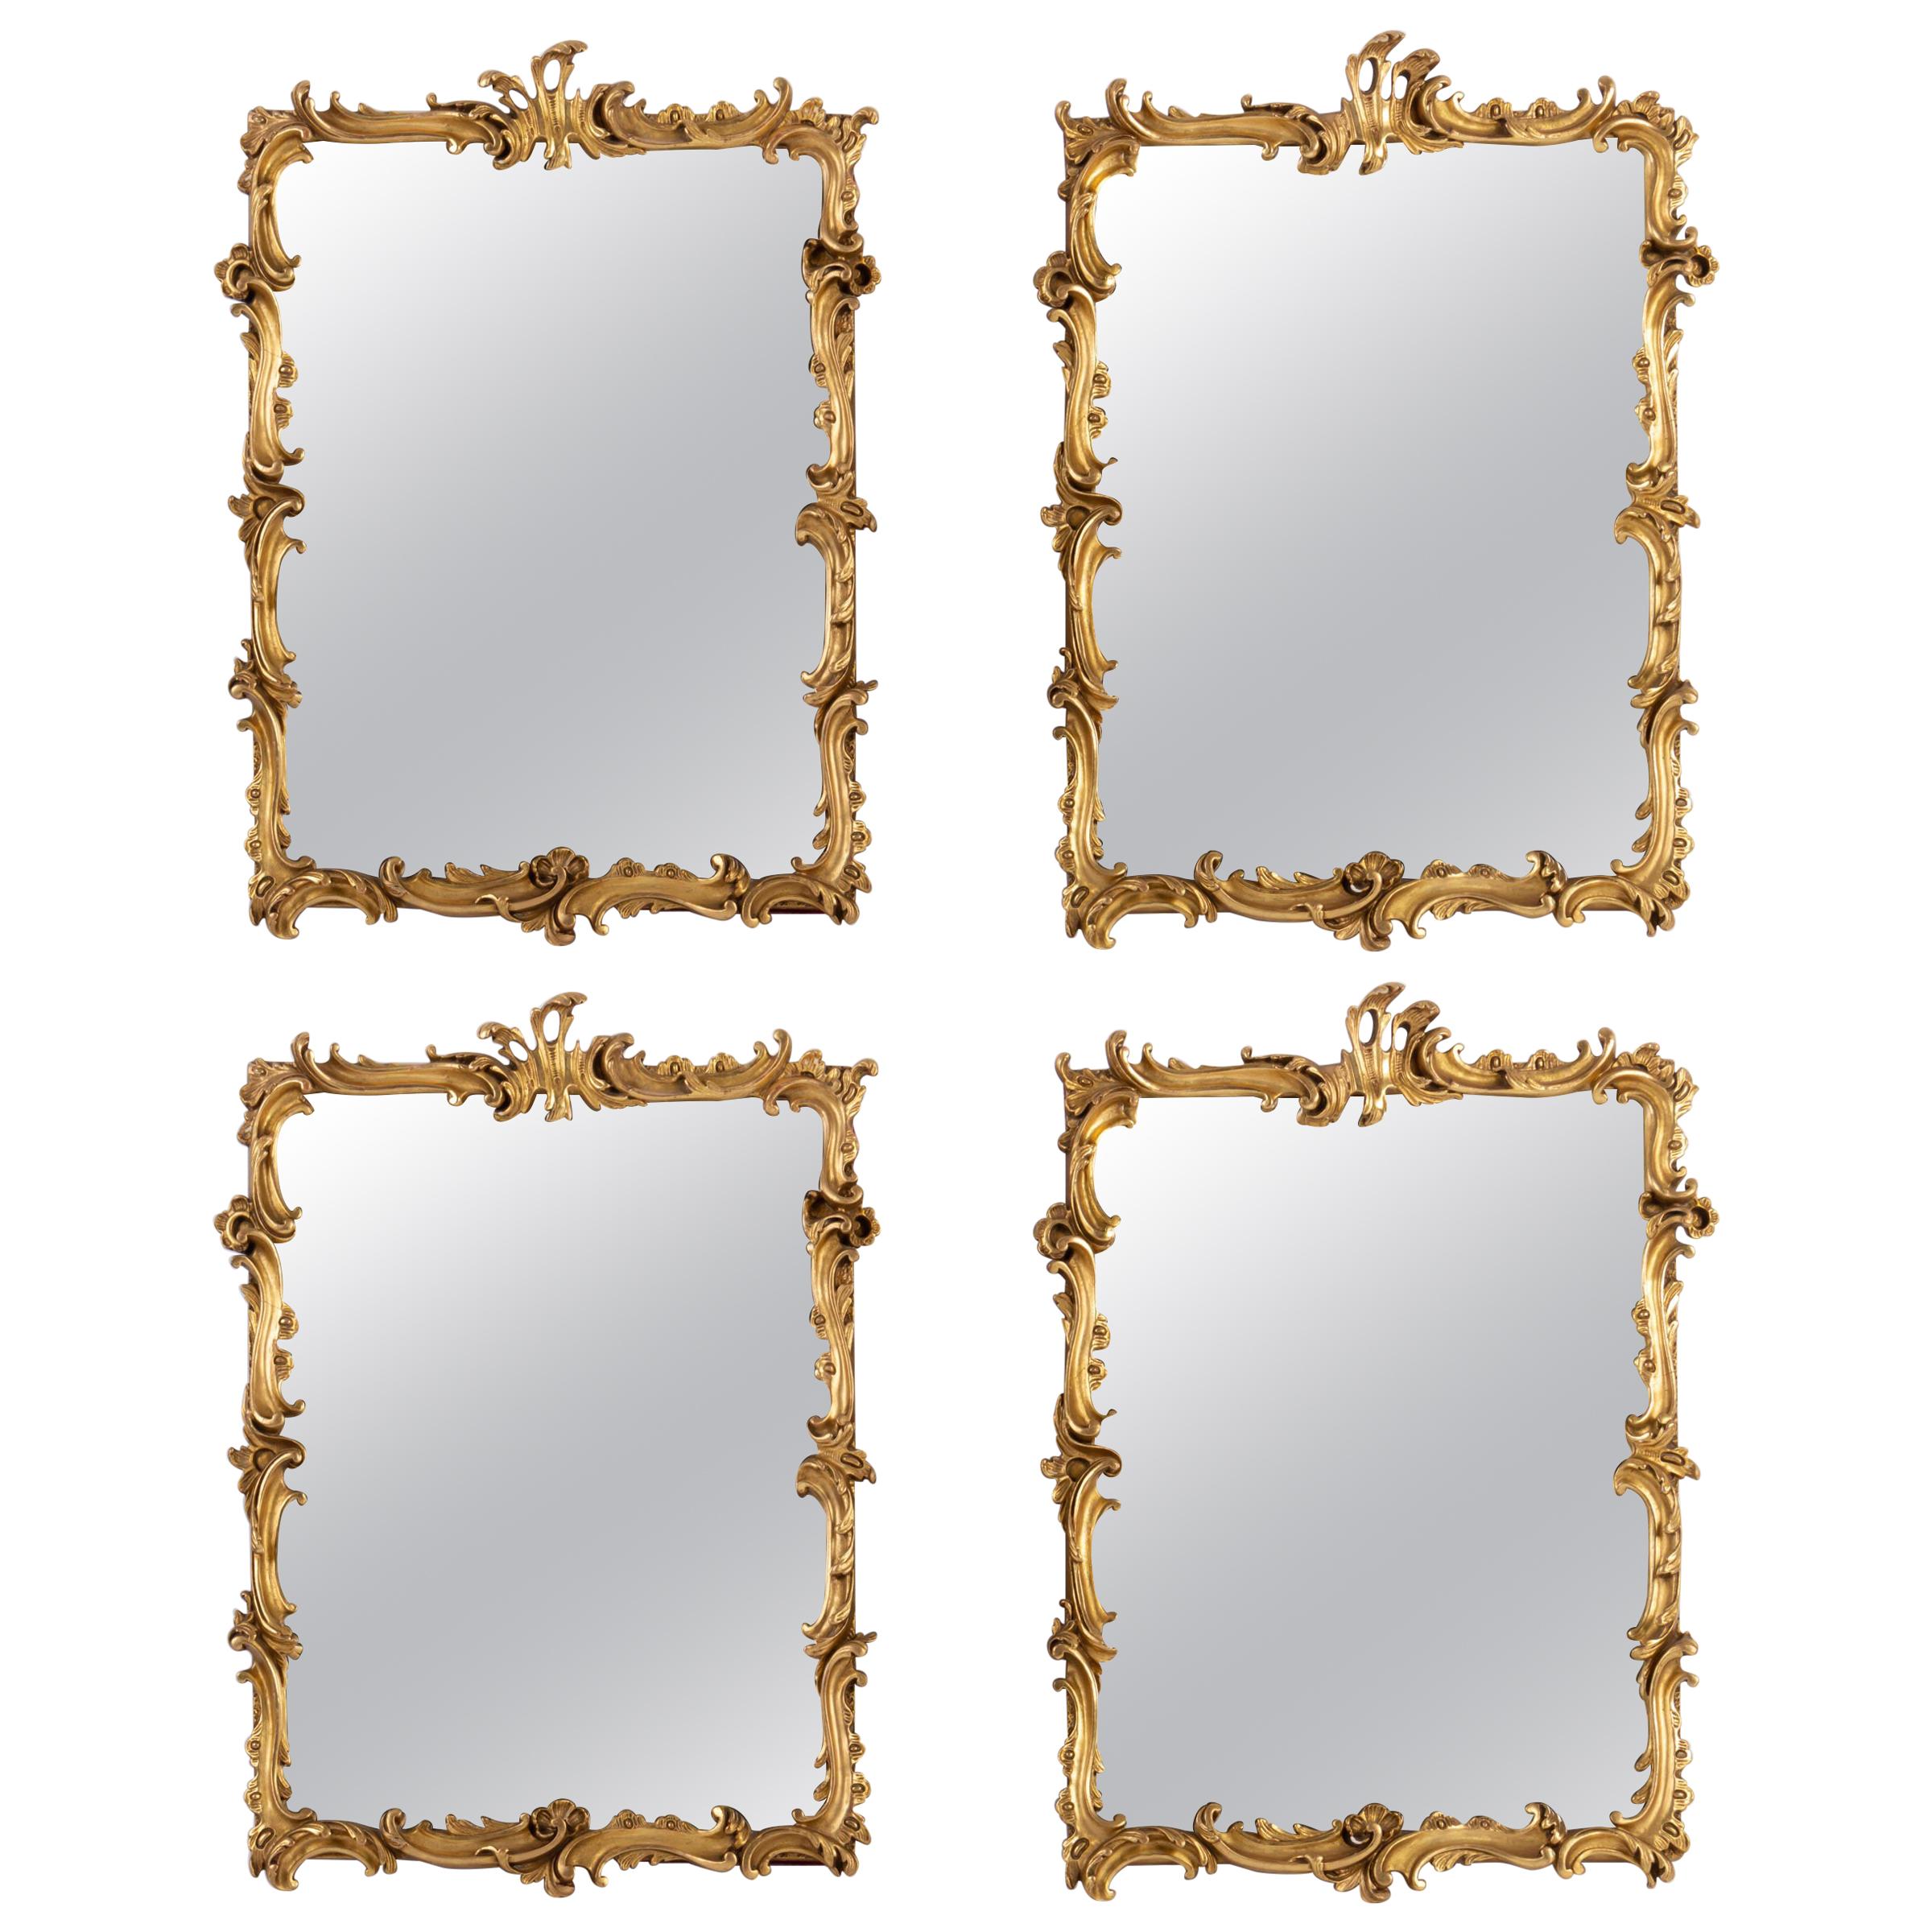 Suite of 4 golden stucco Mirrors